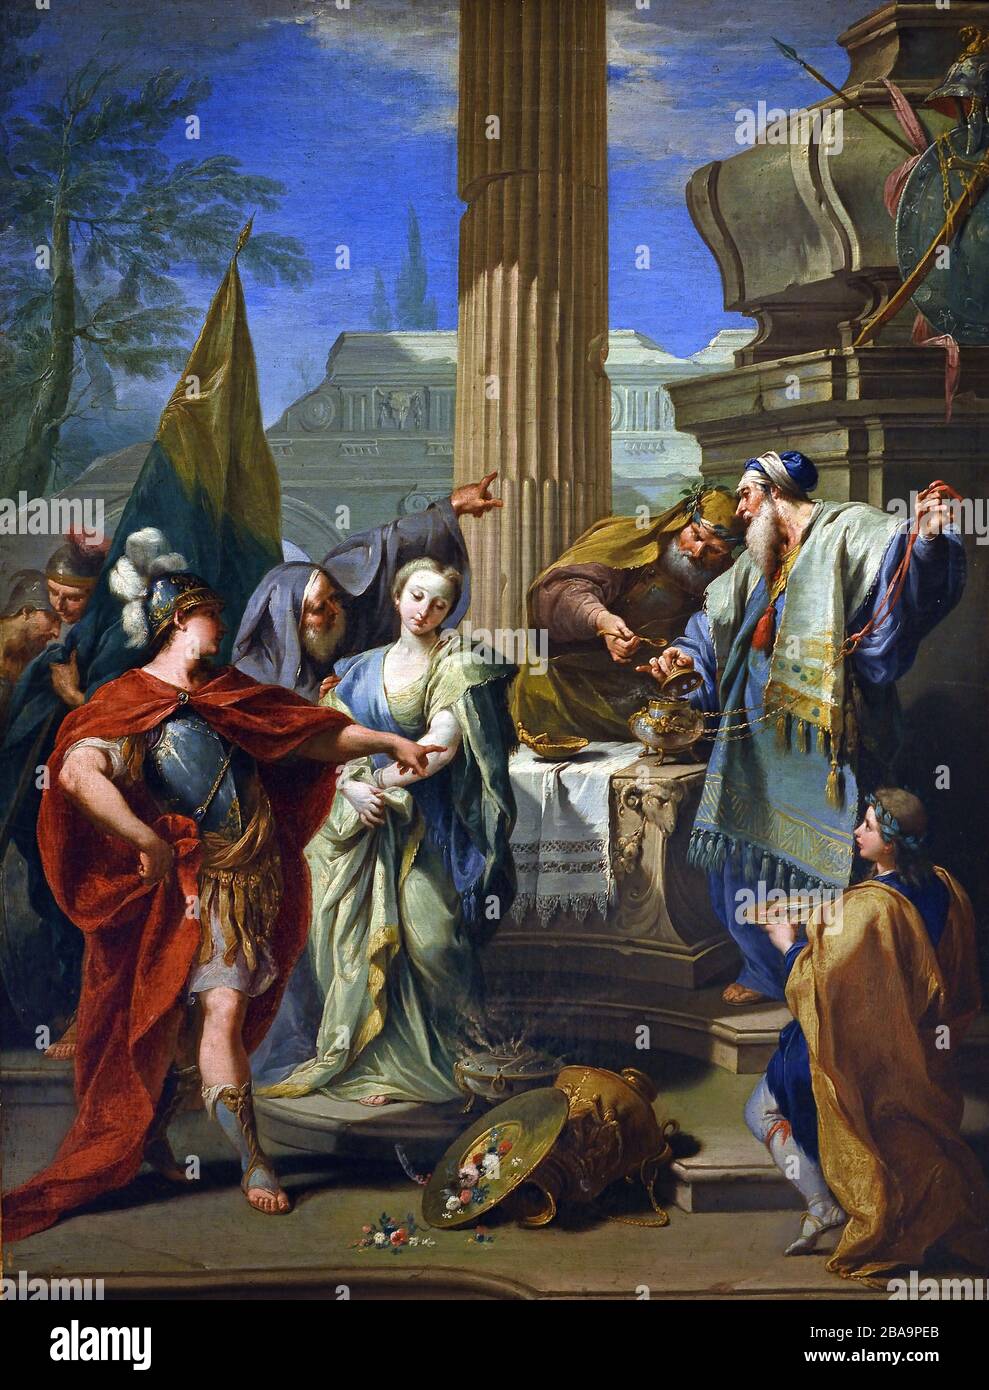 The Sacrifice of Polyxena 1730 Giovanni Battista Pittoni Venice 1687-1767 Italy Italian ( Polyxena, with whom Achilles fell in love, was the younger daughter of Priam and Hecuba, the king and queen of Troy. ) Stock Photo